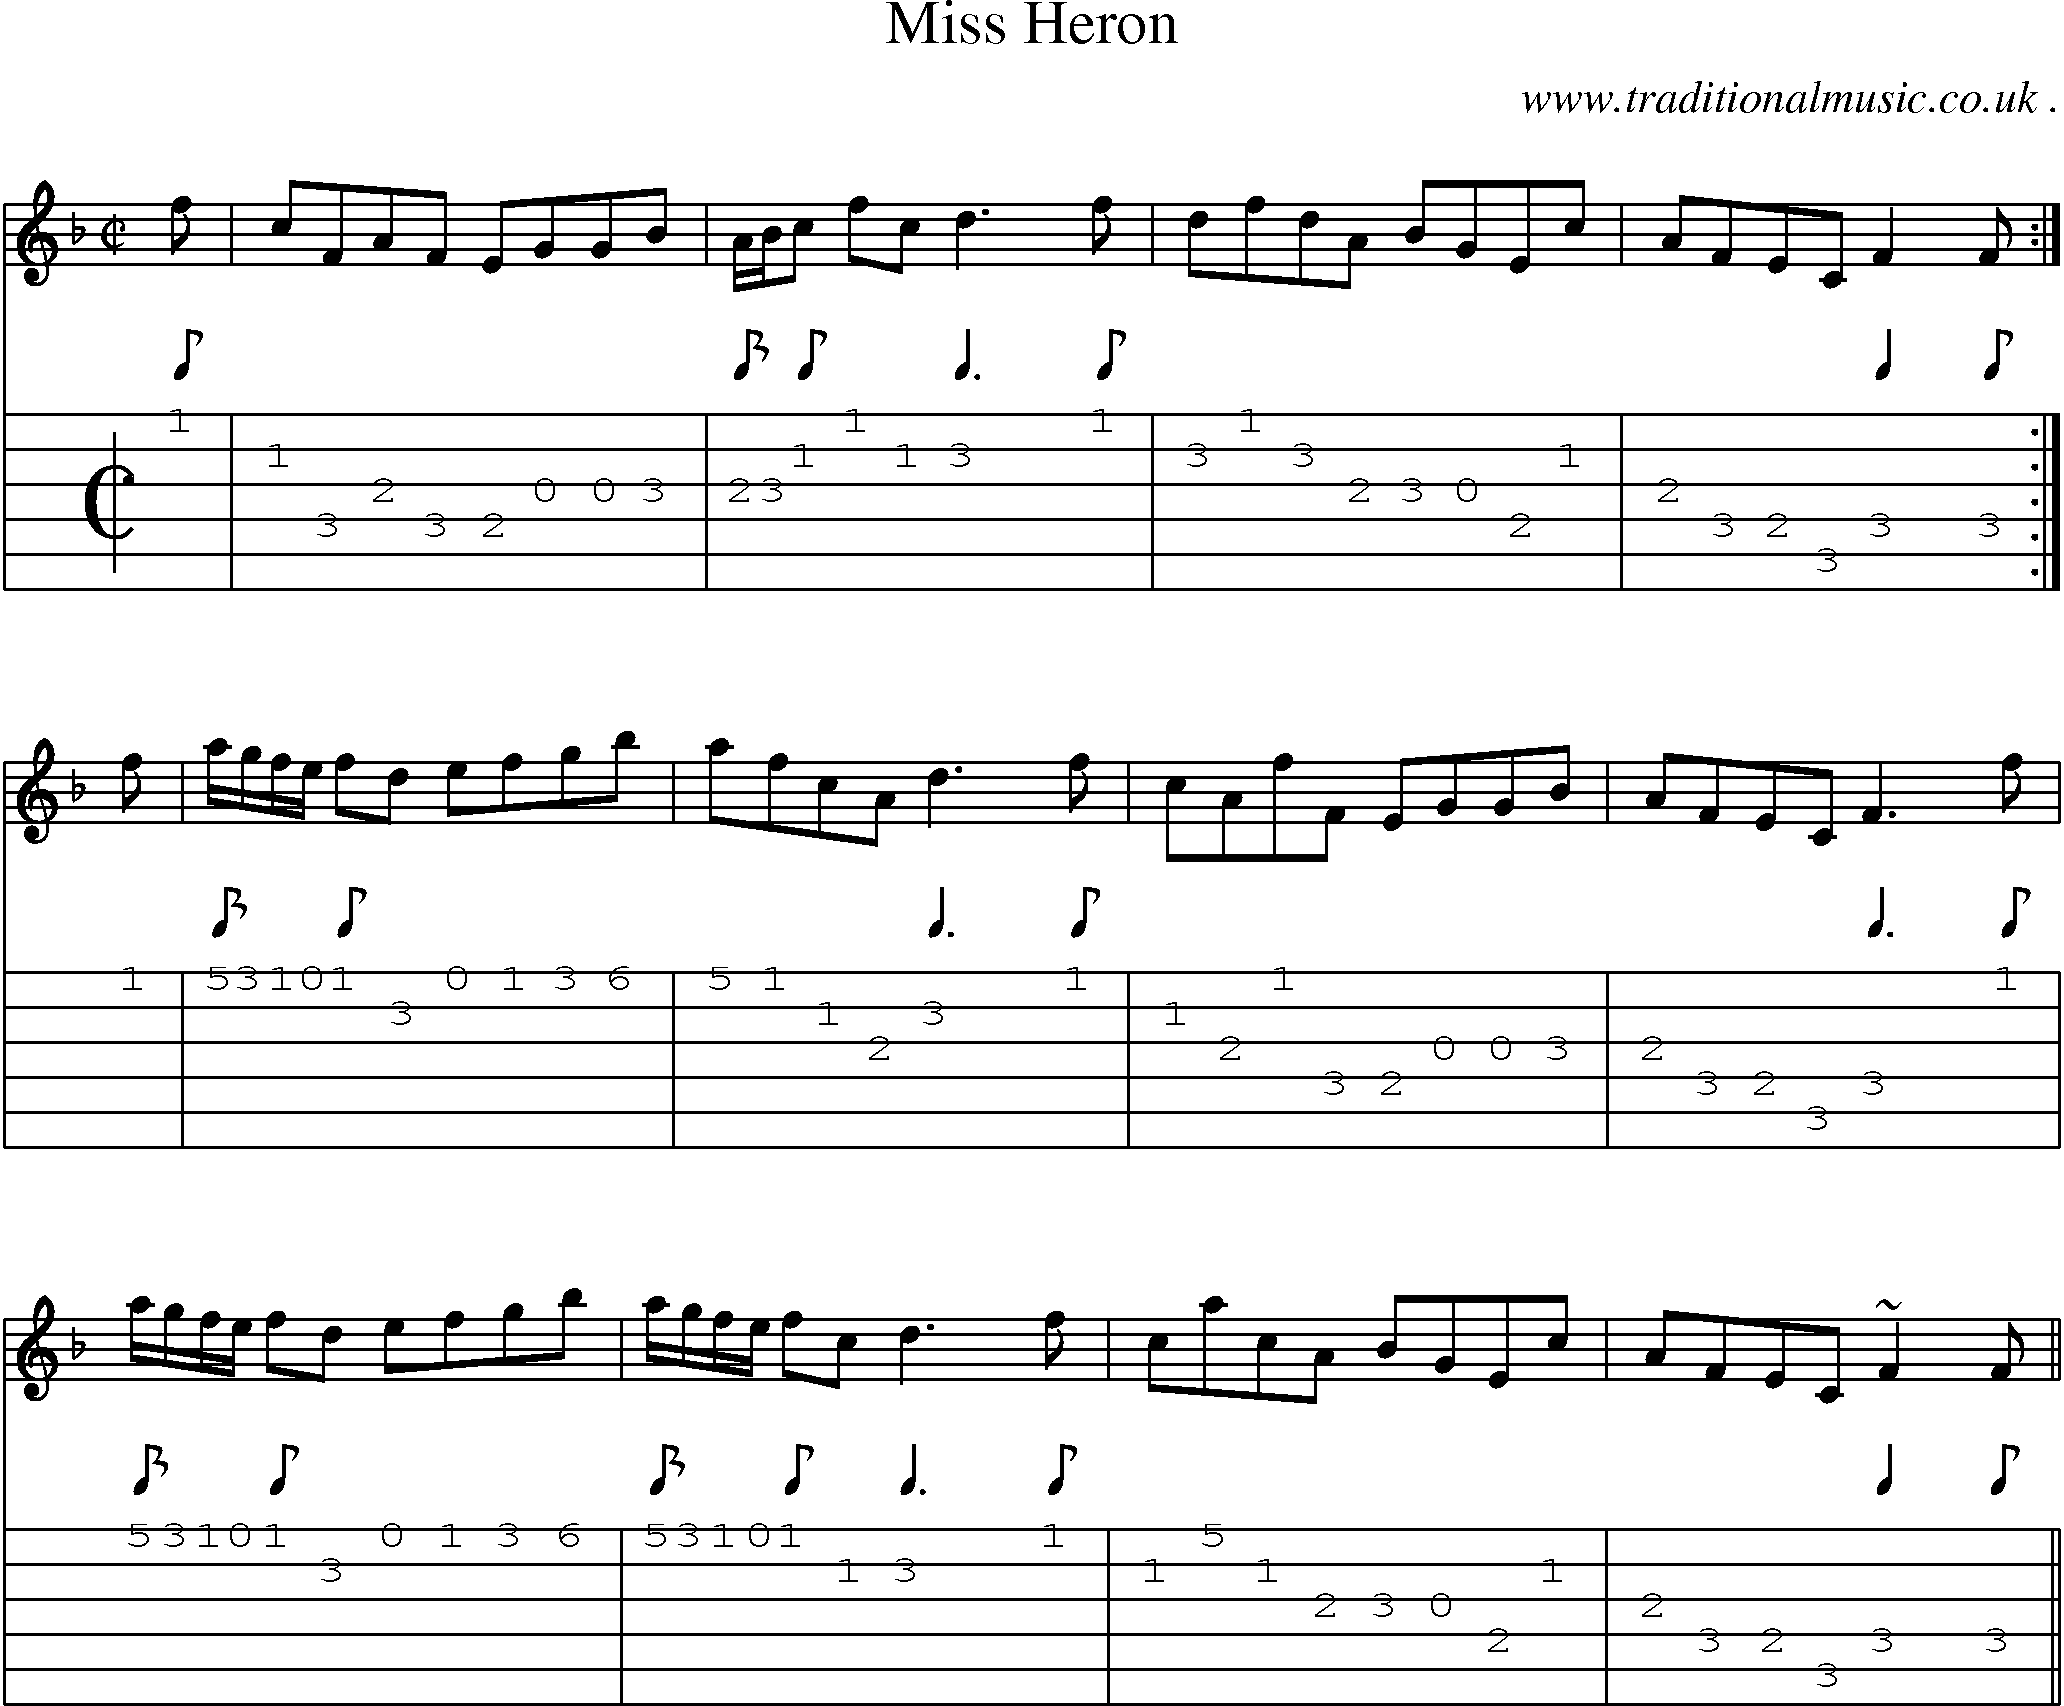 Sheet-music  score, Chords and Guitar Tabs for Miss Heron